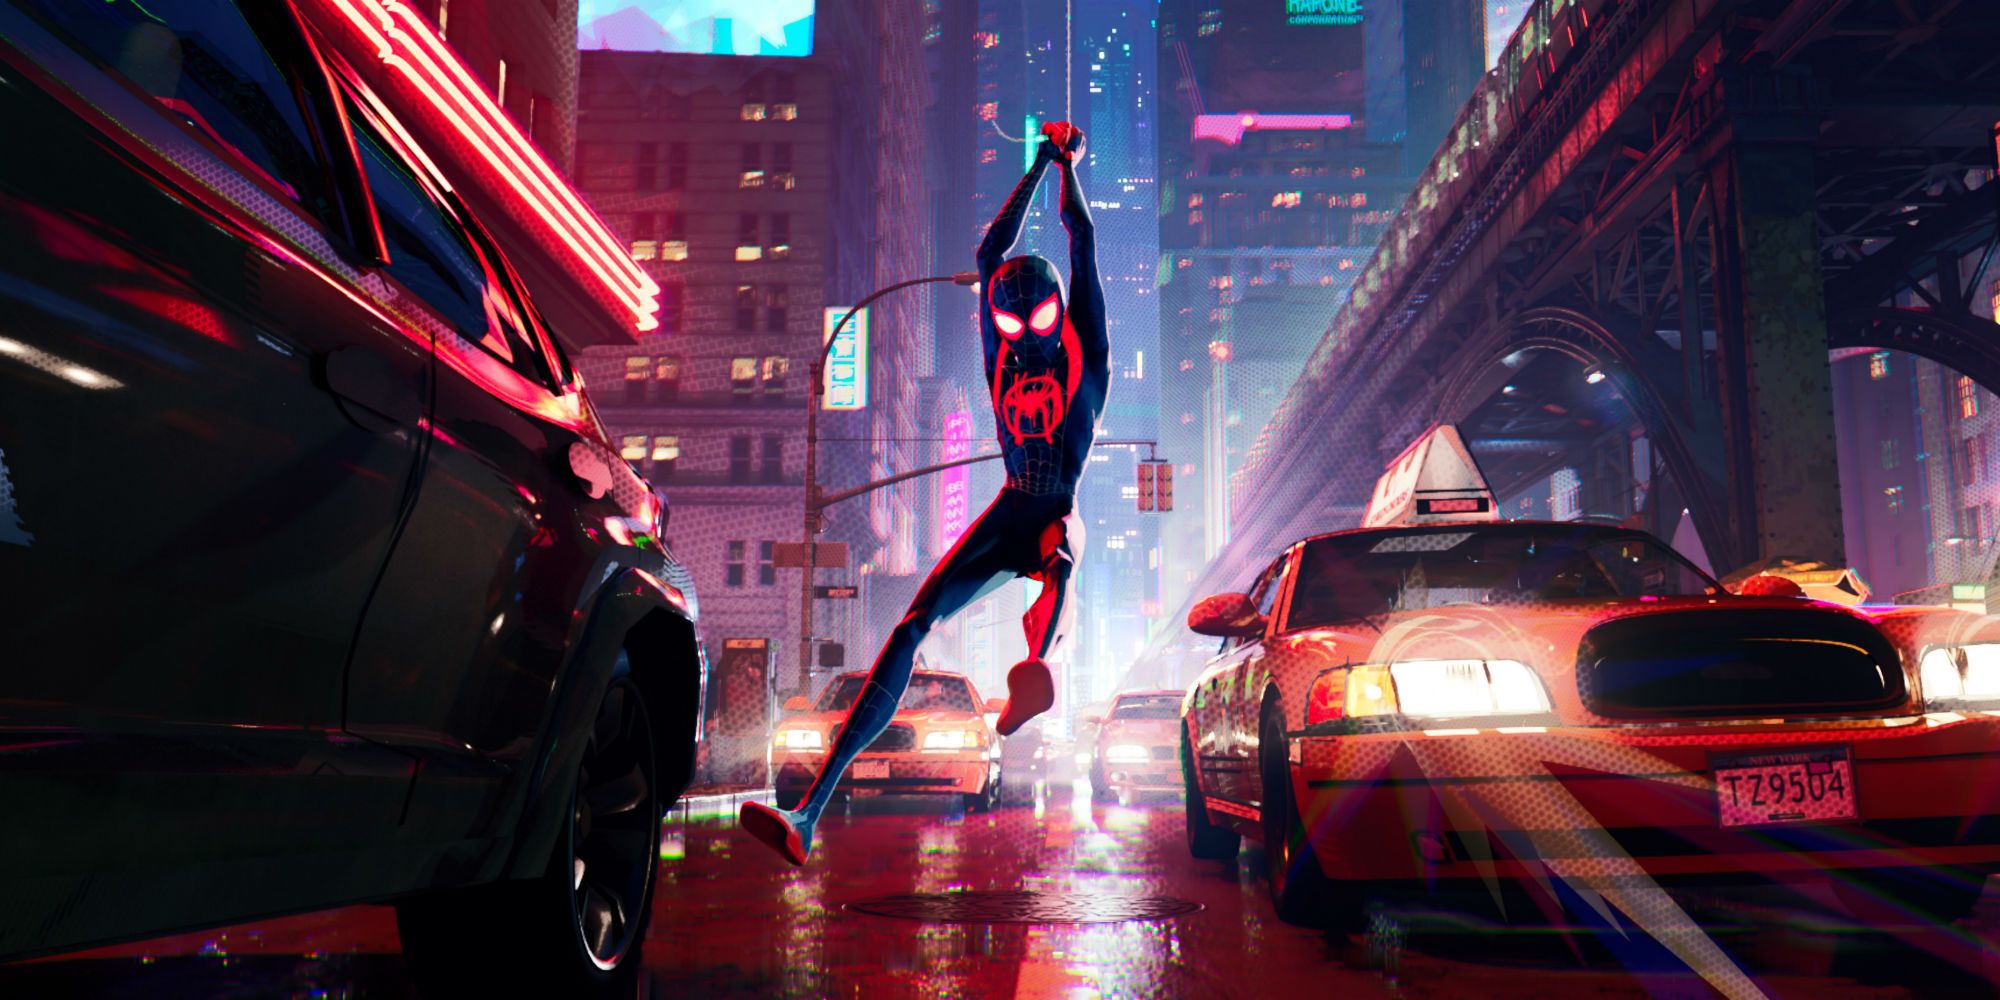 Spider-Man swinging through the streets in Spider-Man: Into the Spider-Verse.